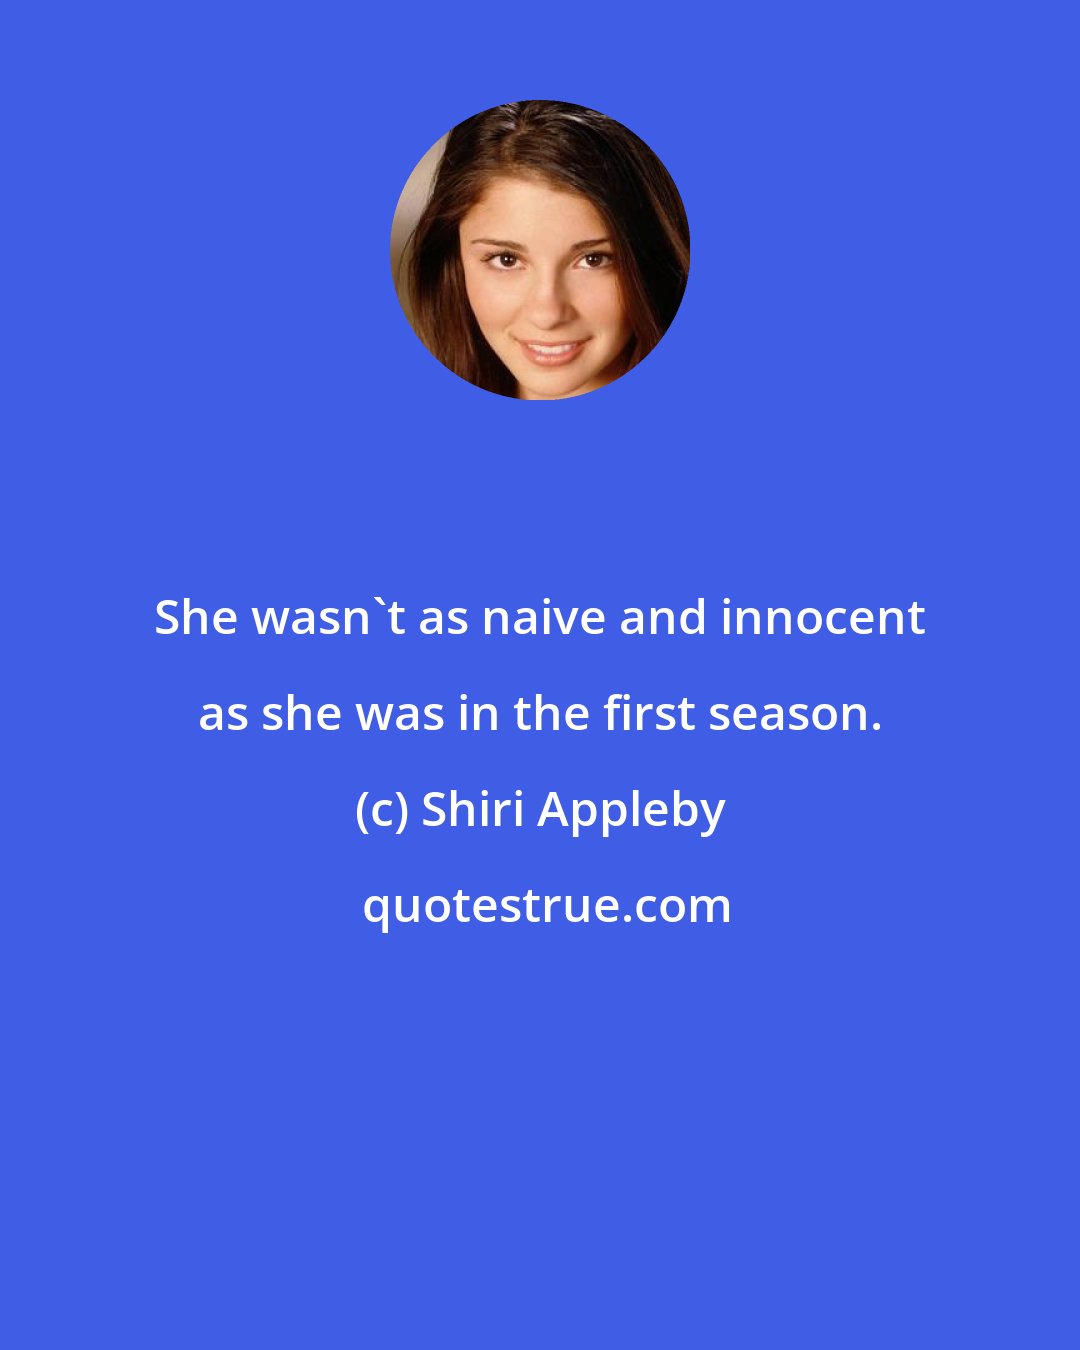 Shiri Appleby: She wasn't as naive and innocent as she was in the first season.